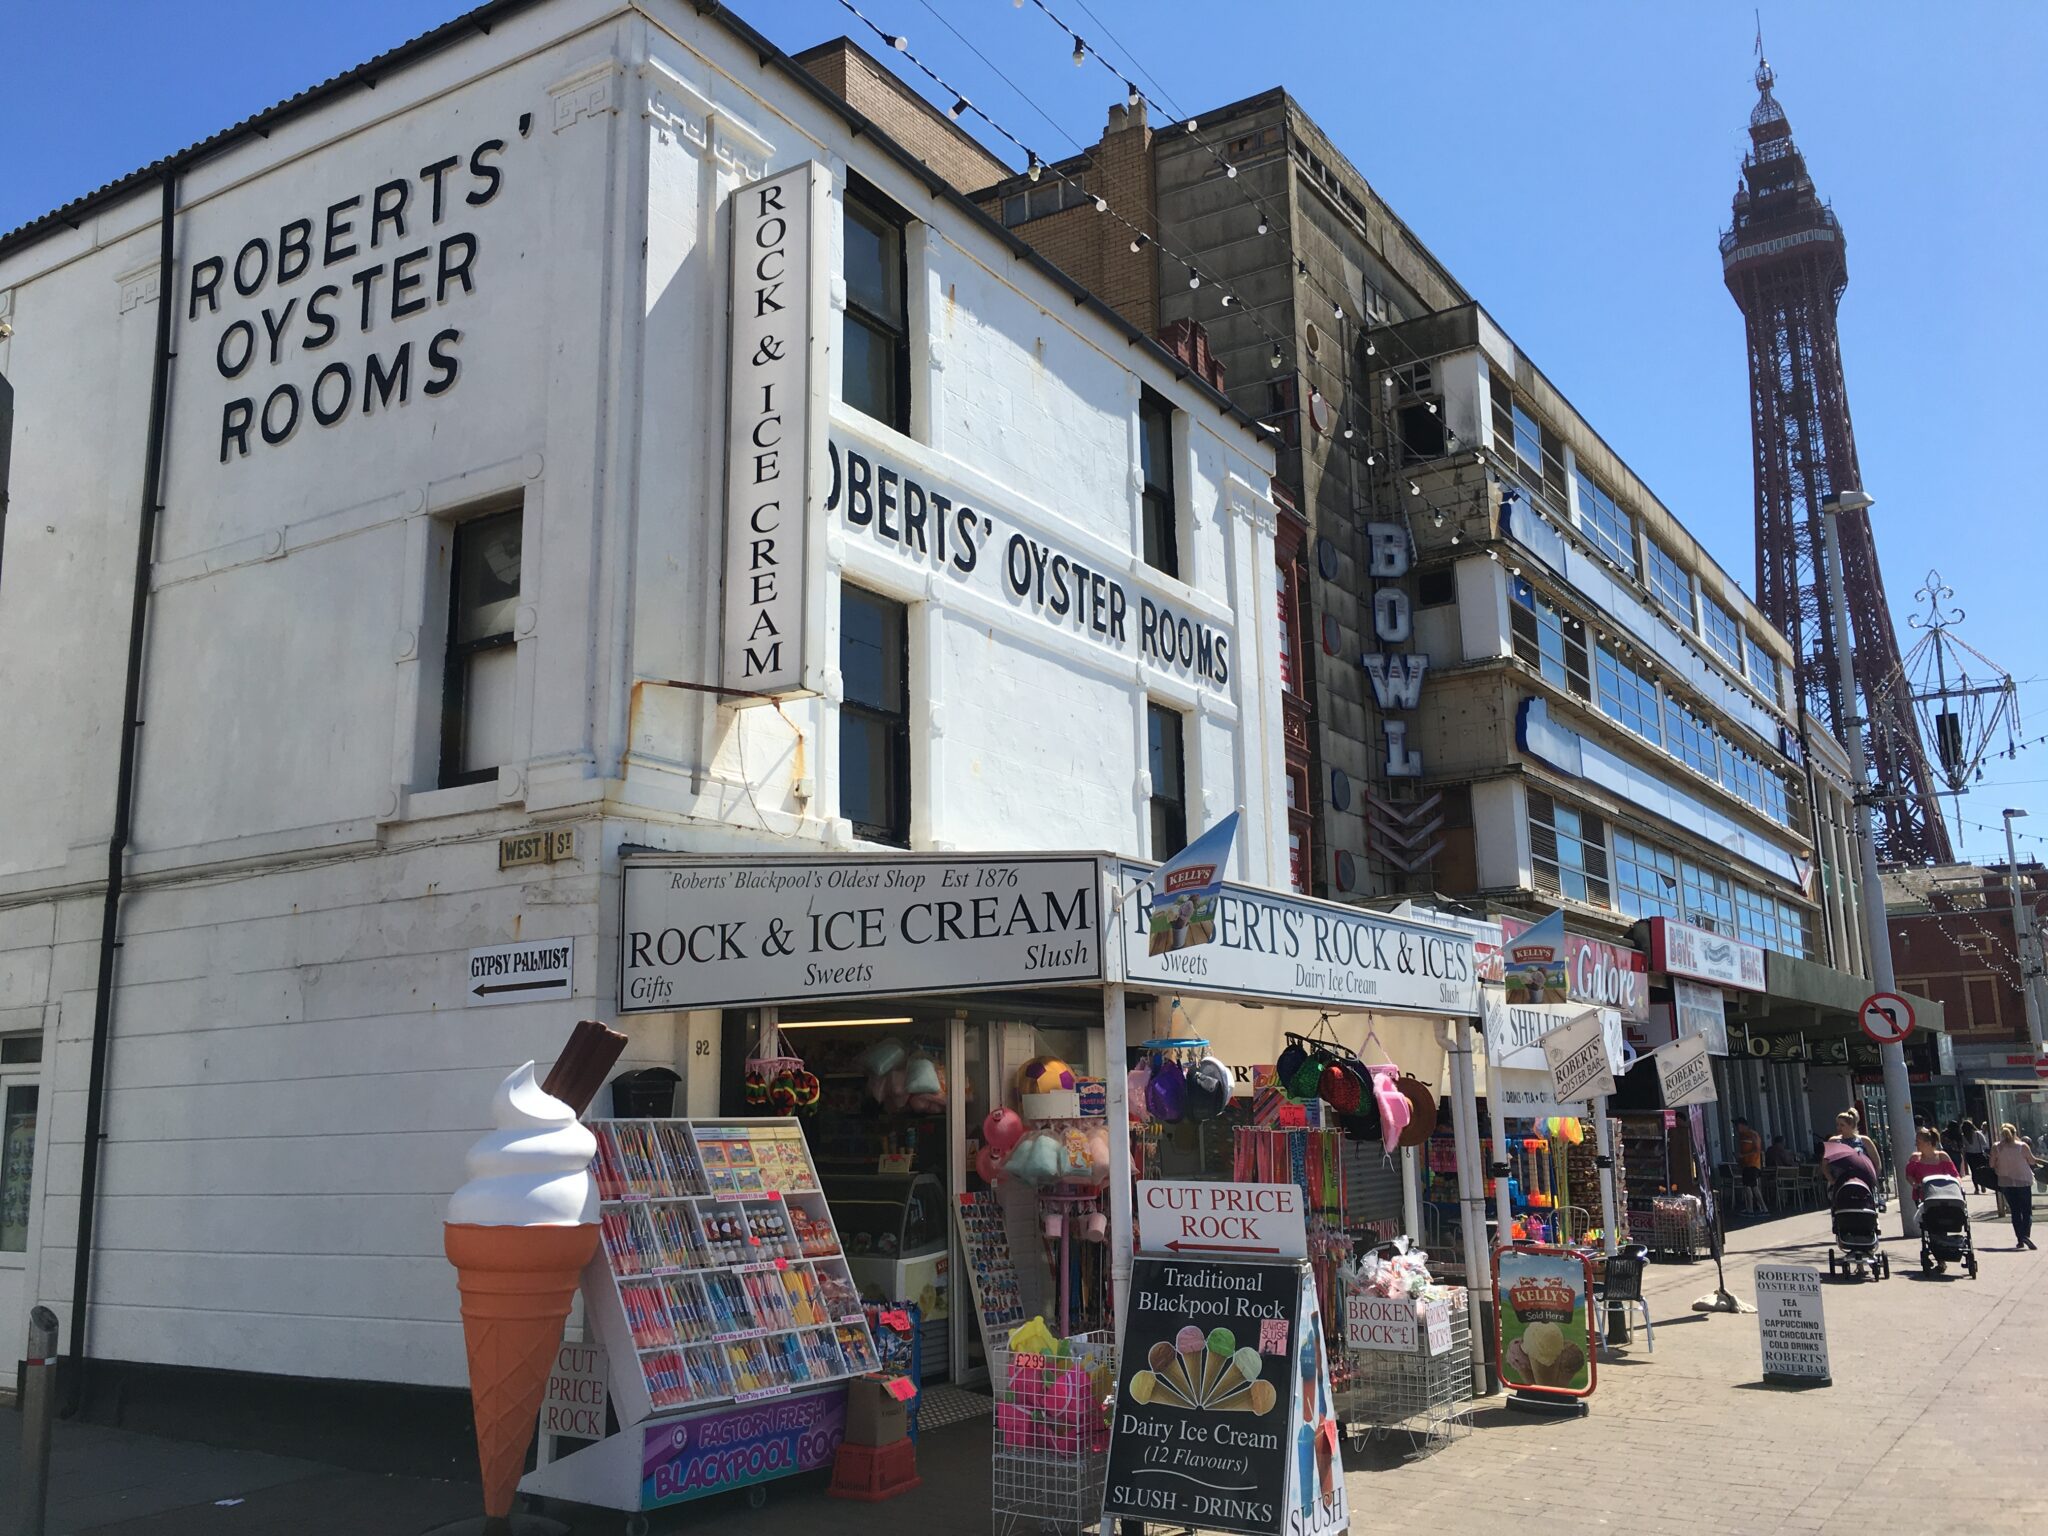 Roberts' Oyster Rooms